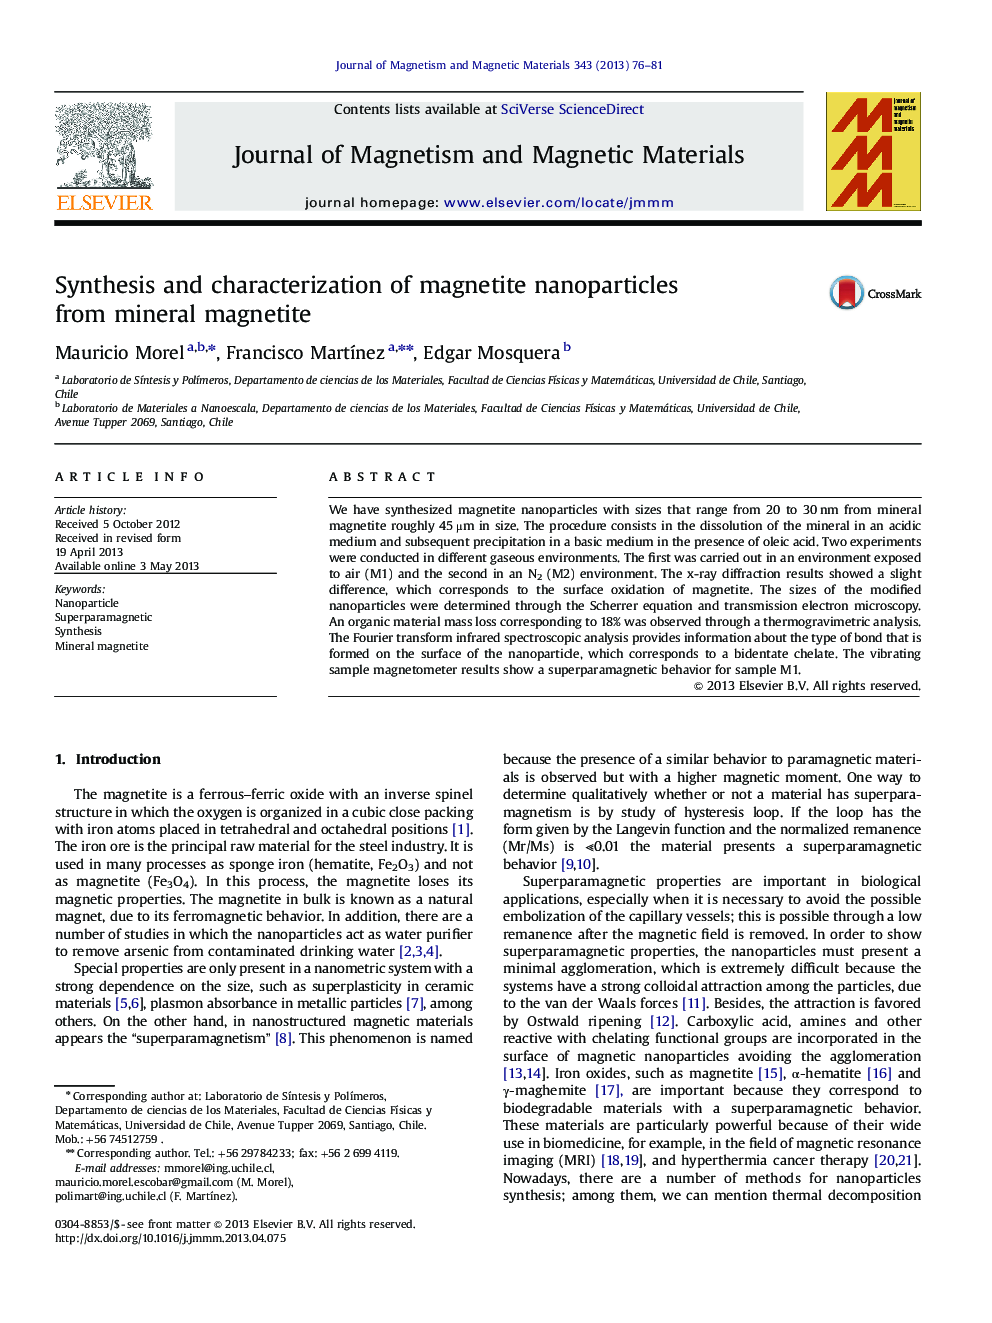 Synthesis and characterization of magnetite nanoparticles from mineral magnetite